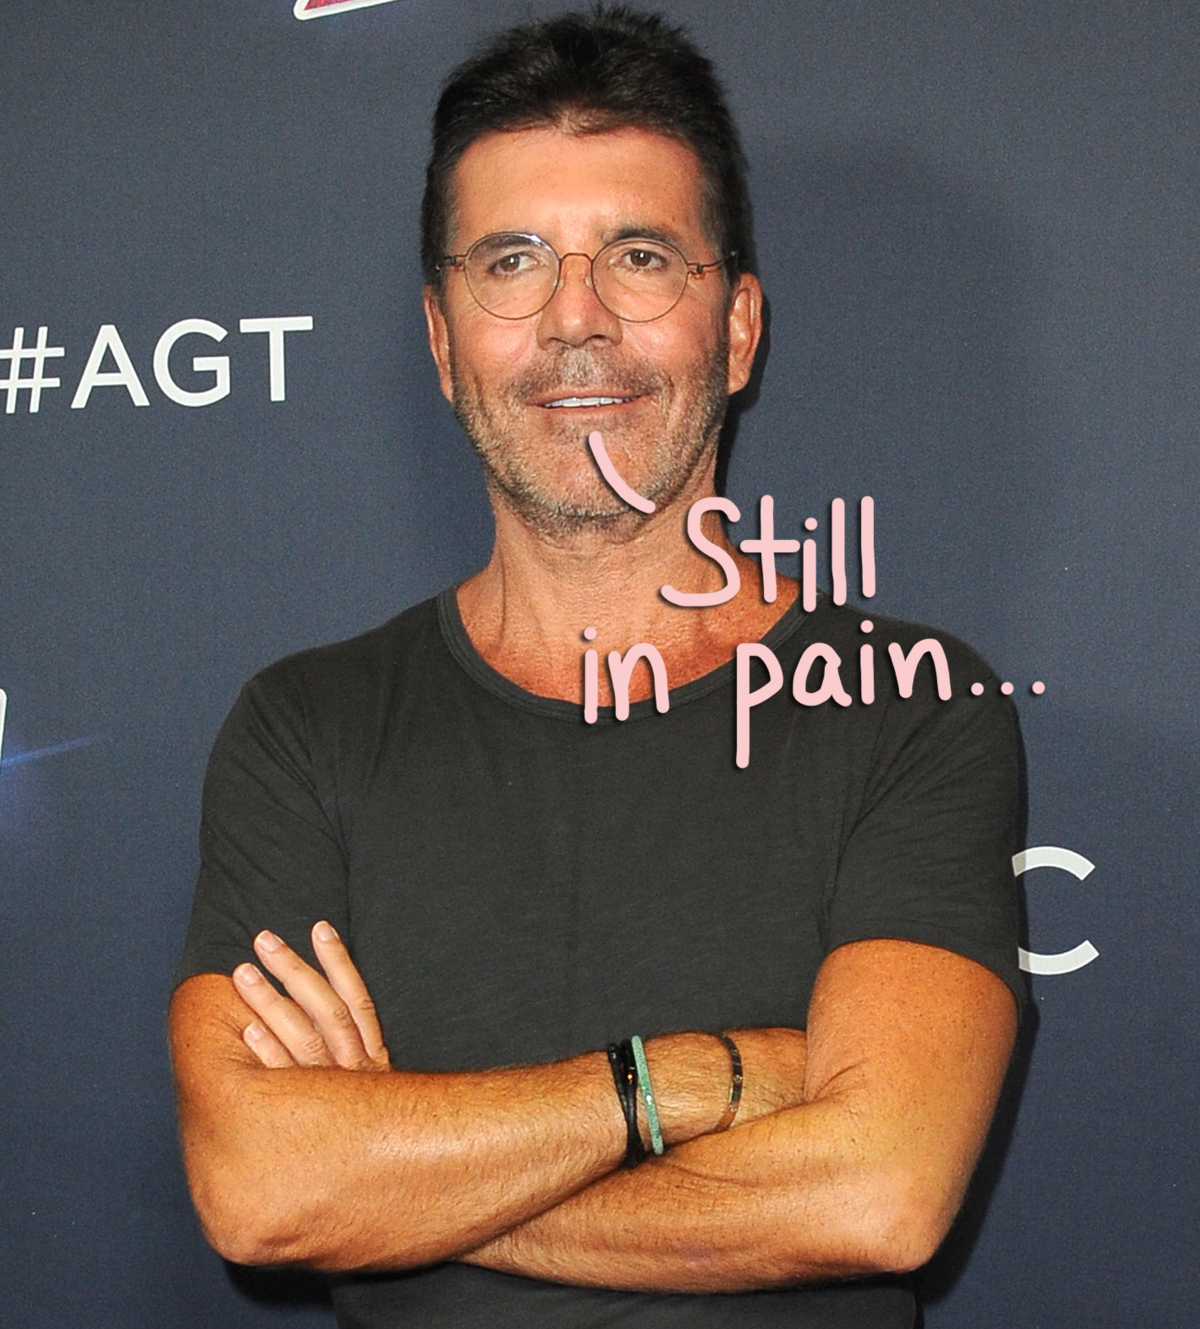 Simon Cowell / Simon Cowell Finally Breaks Silence On His Near-Fatal Bike ... : Myself and a friend were going on a bus and we thought it would be a joke to put the gun to the driver's head and say take us to where we were.